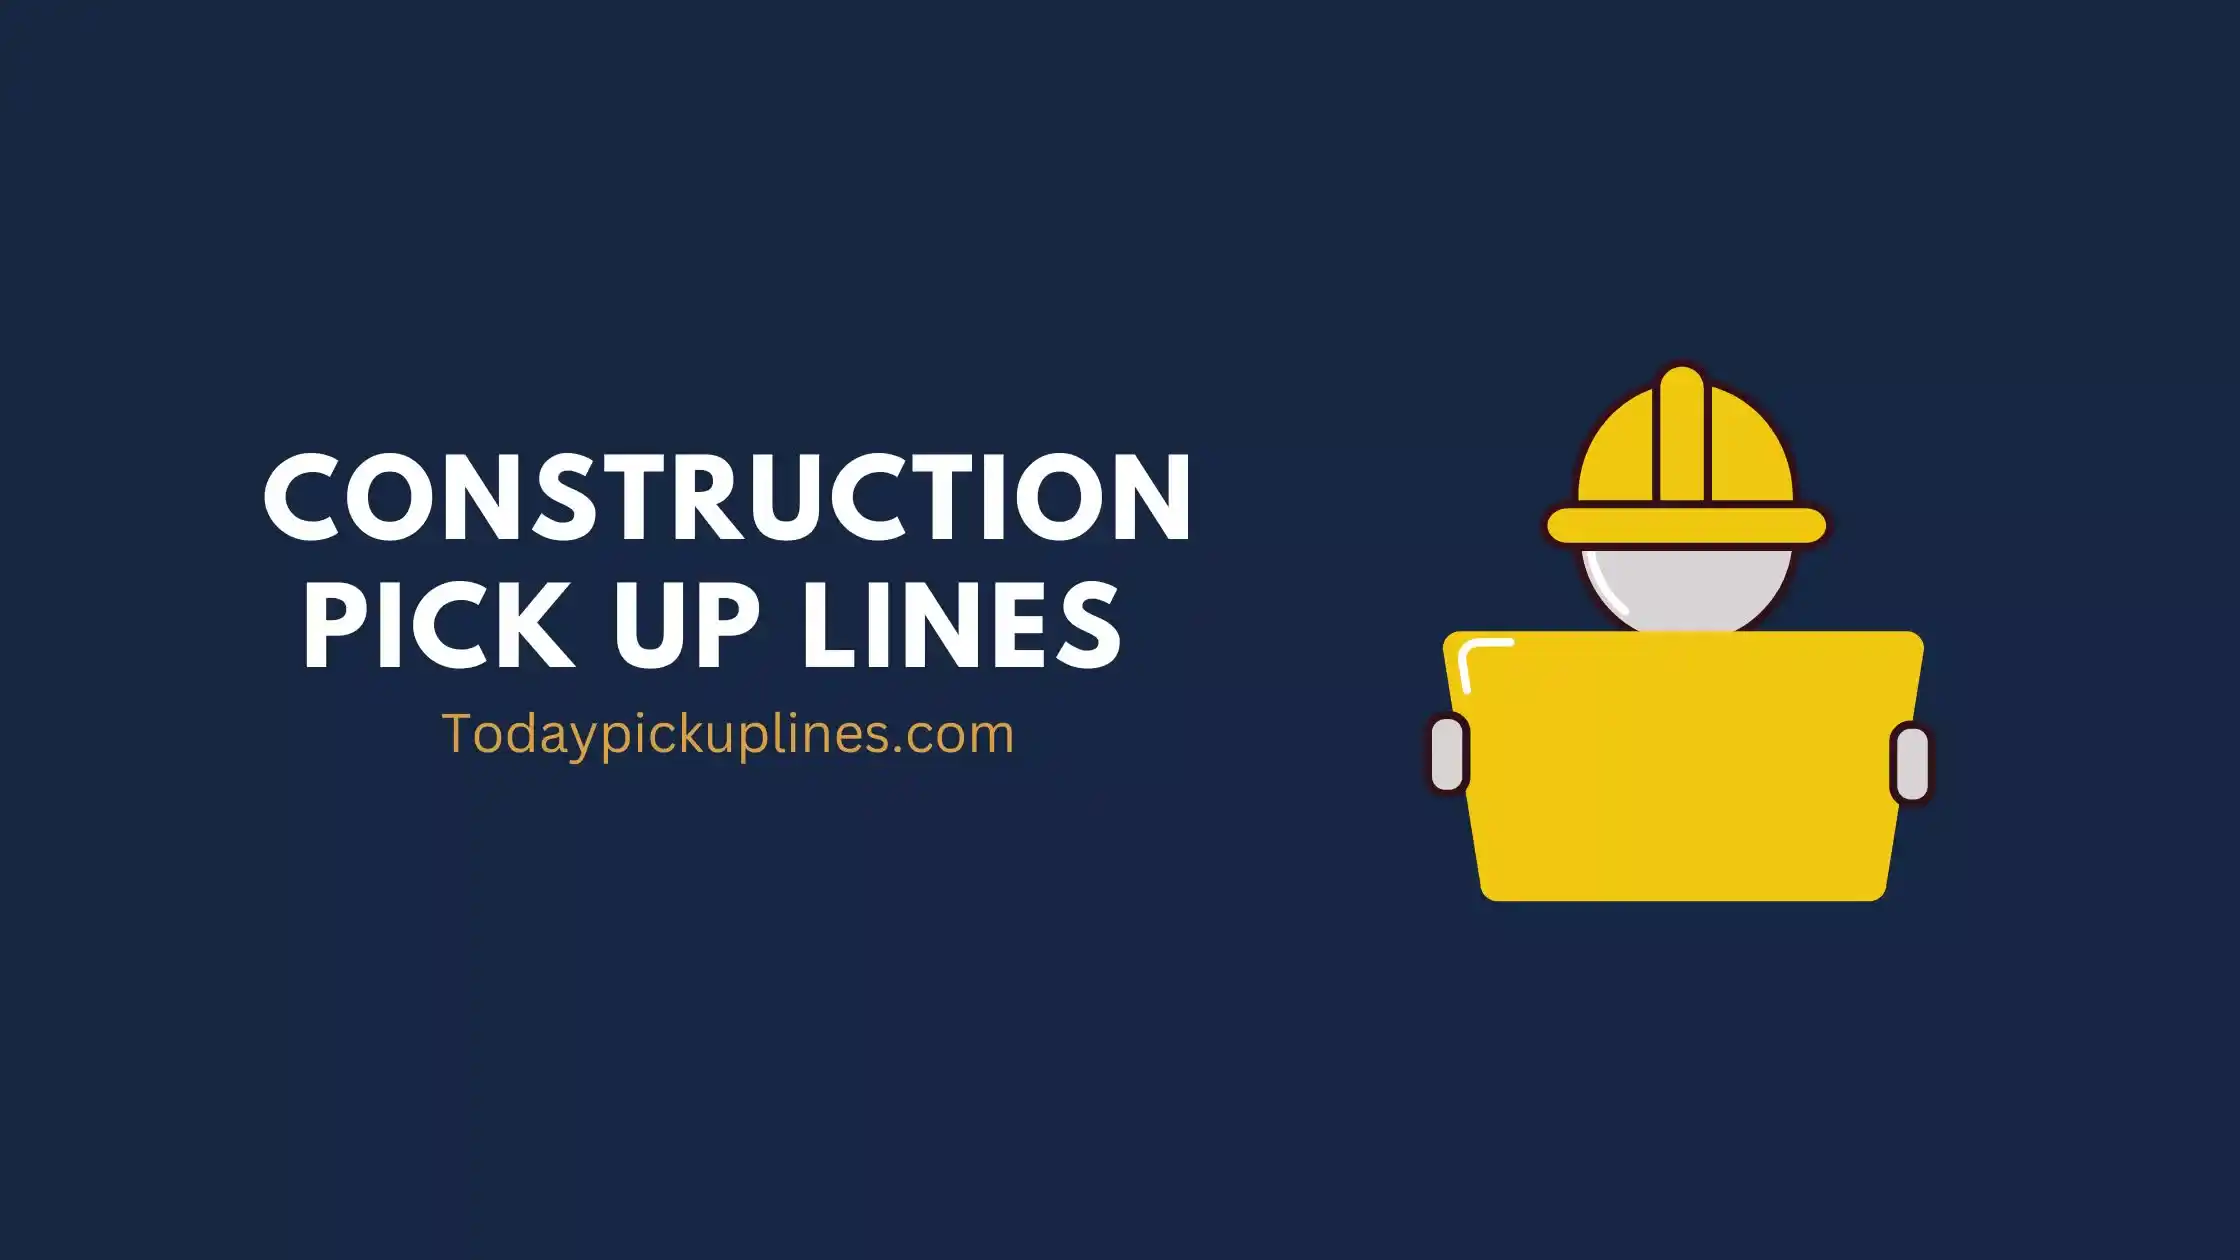 Construction Pick Up Lines